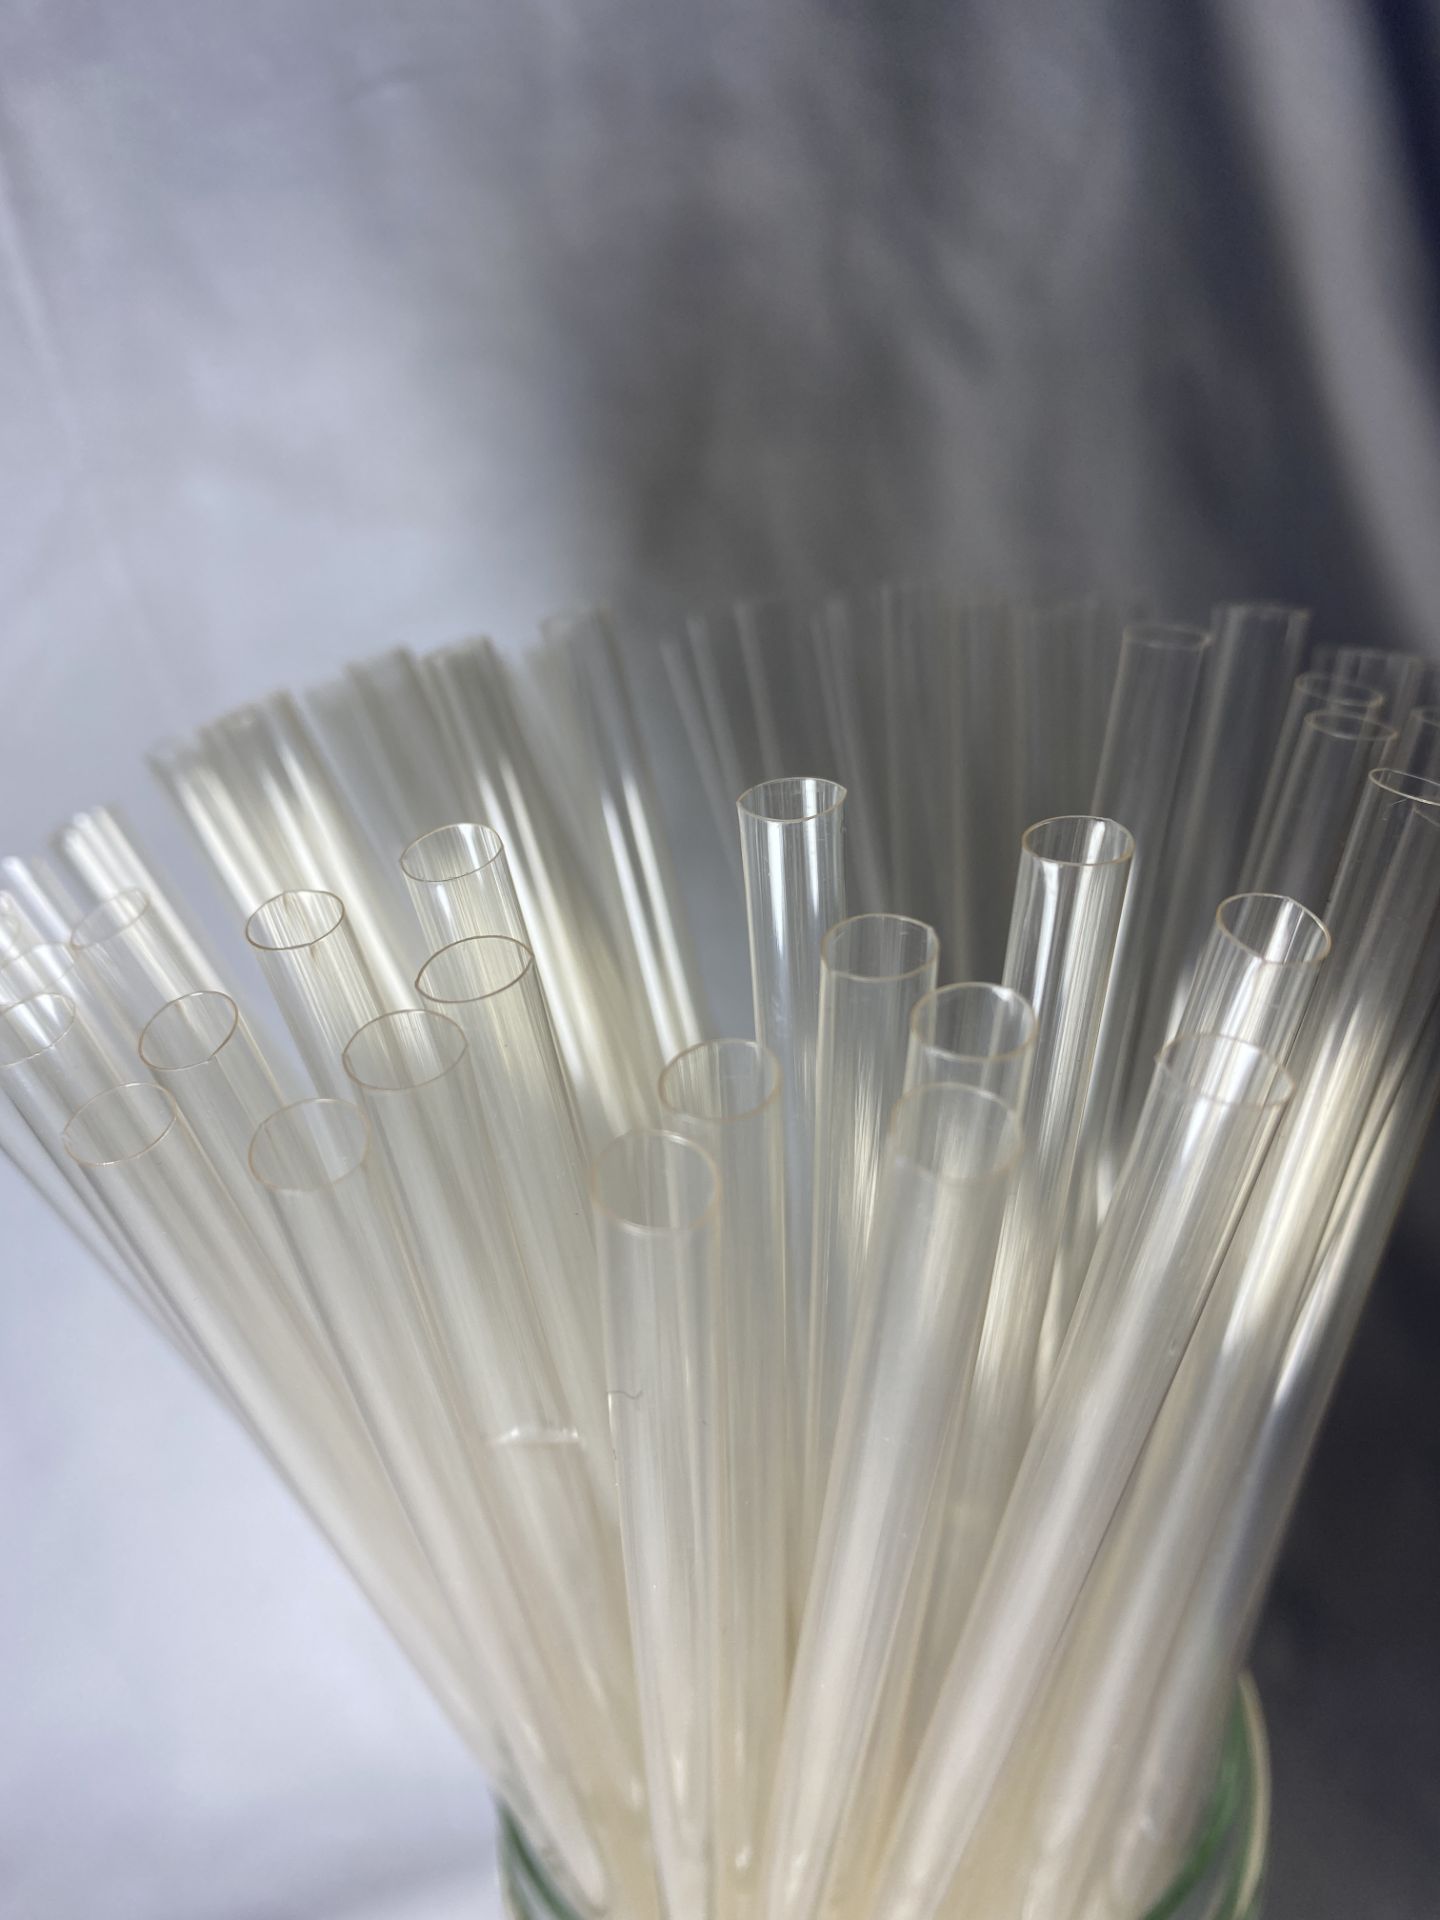 5 x Boxes of Clear PLA Compostable Jumbo Straws by 888 Gastro Disposables - Image 3 of 3